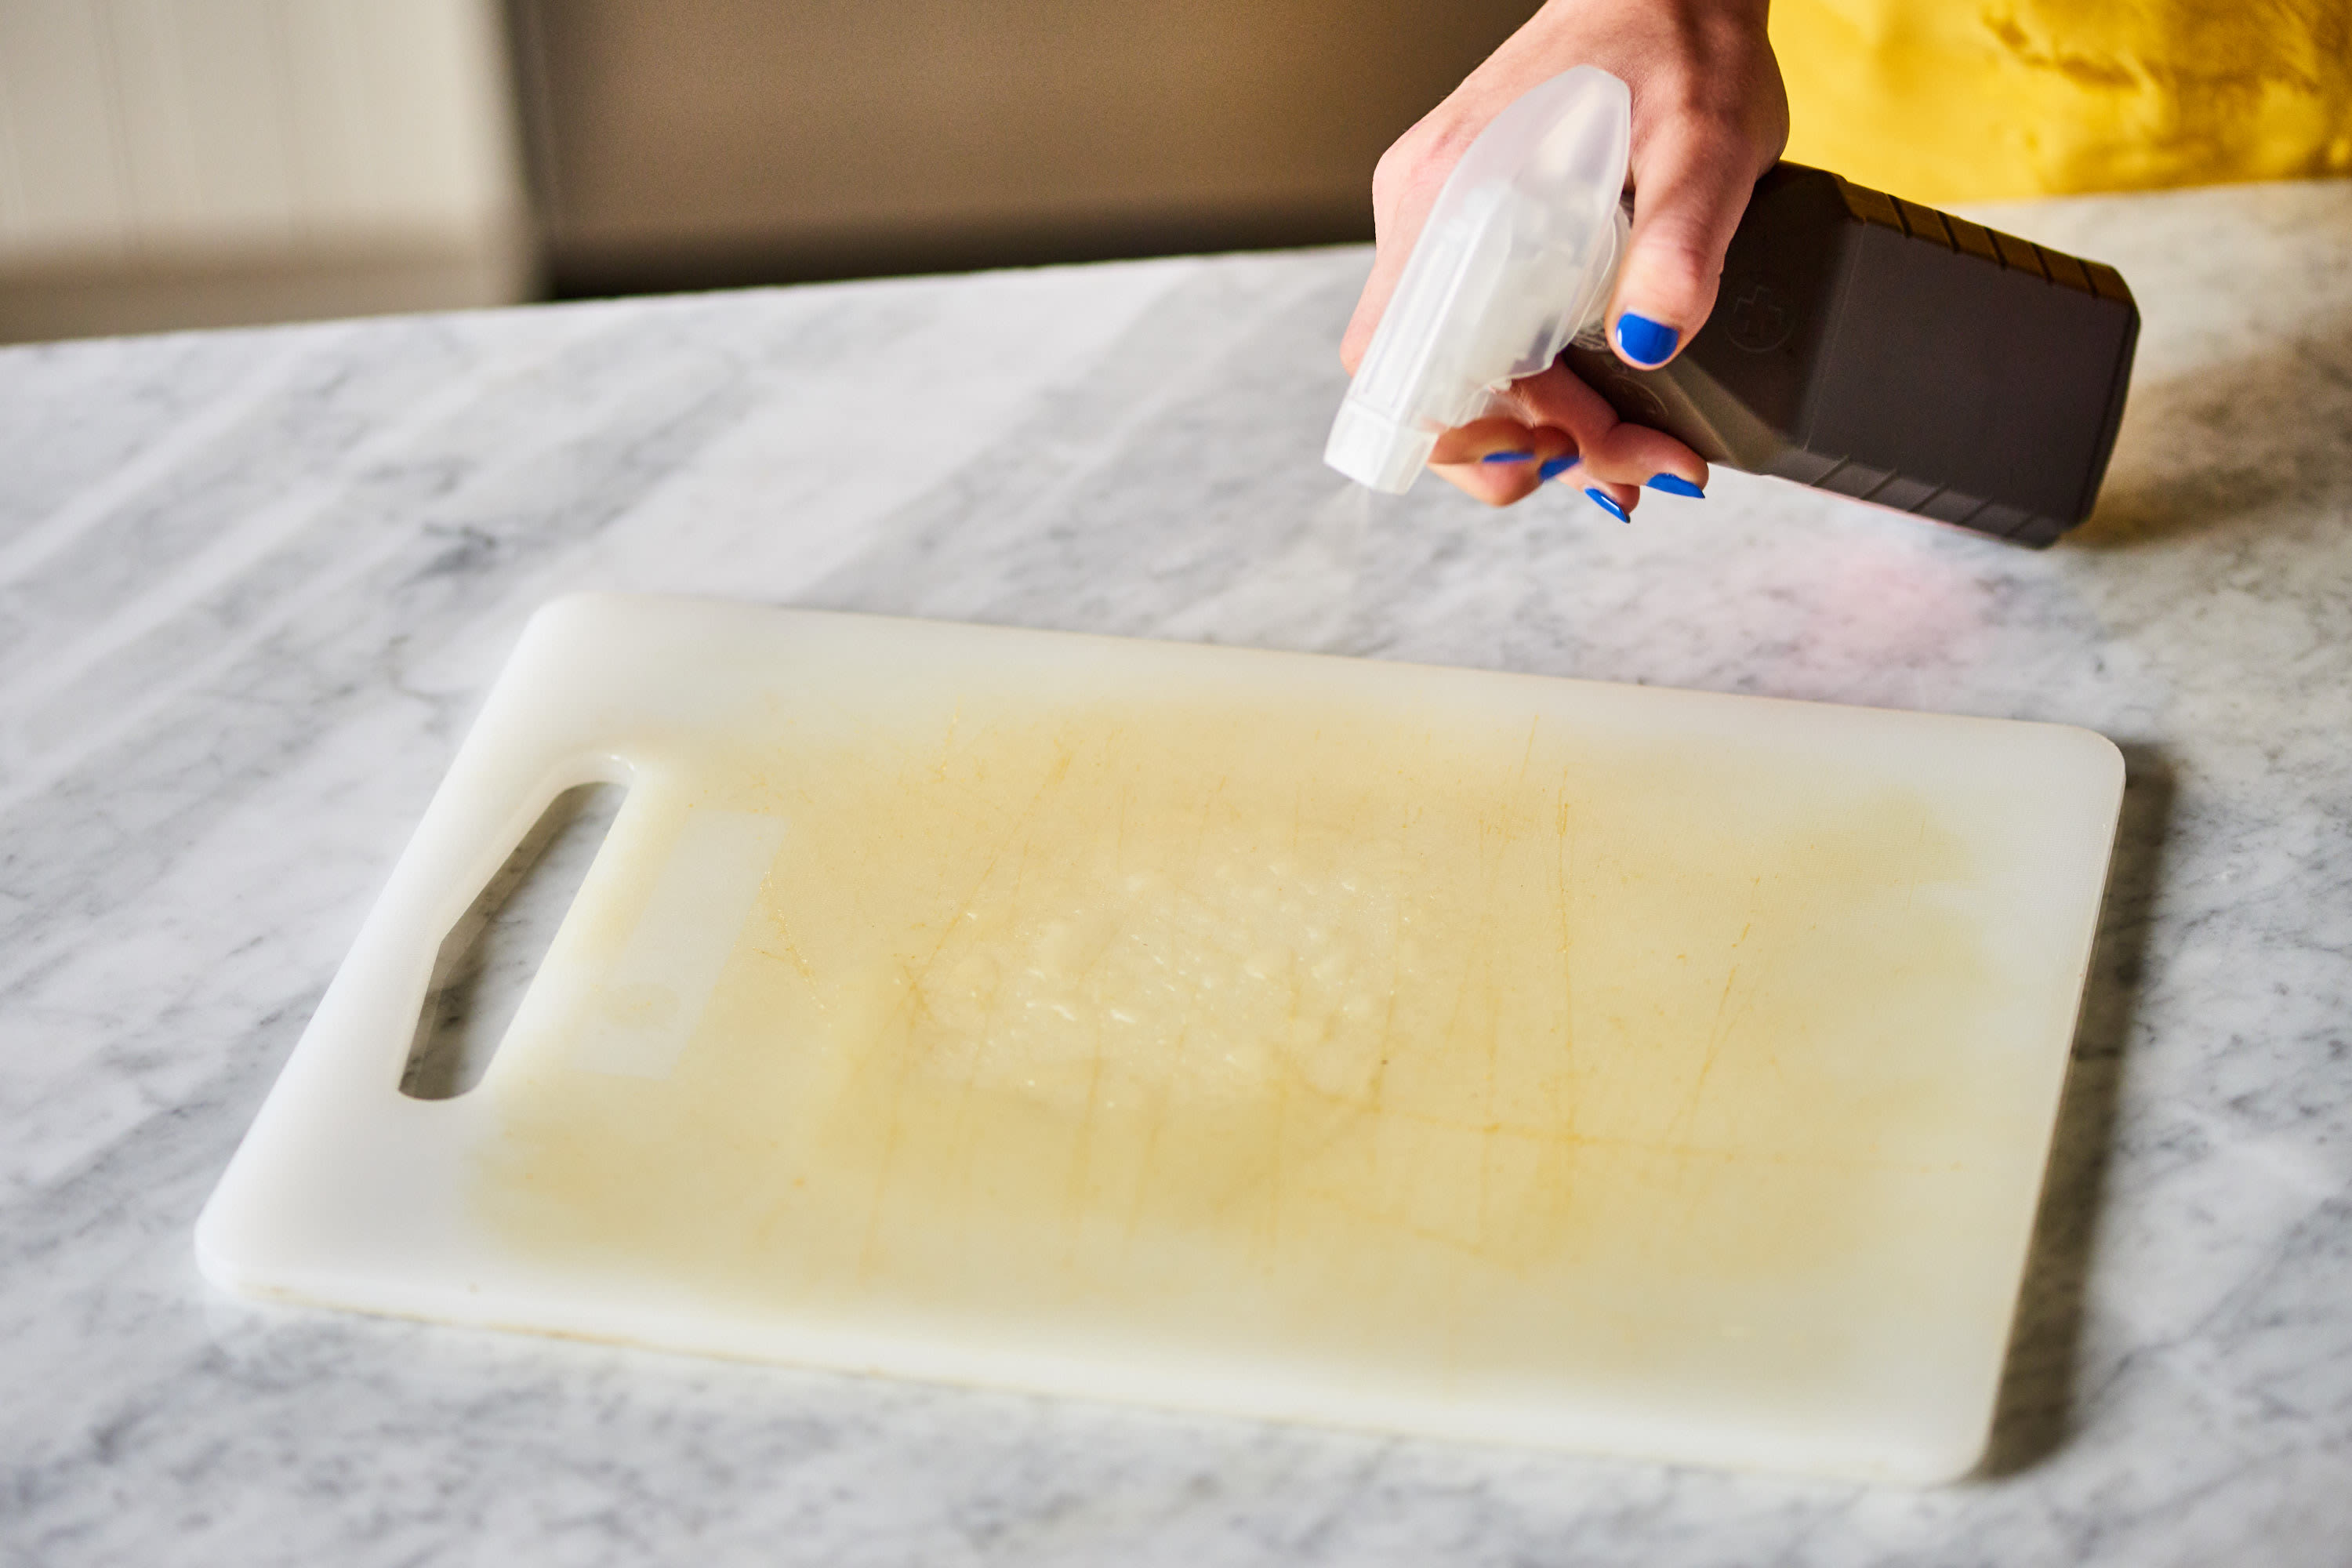 Clean and Disinfect Plastic Cutting Boards Without Bleach  Kitchn